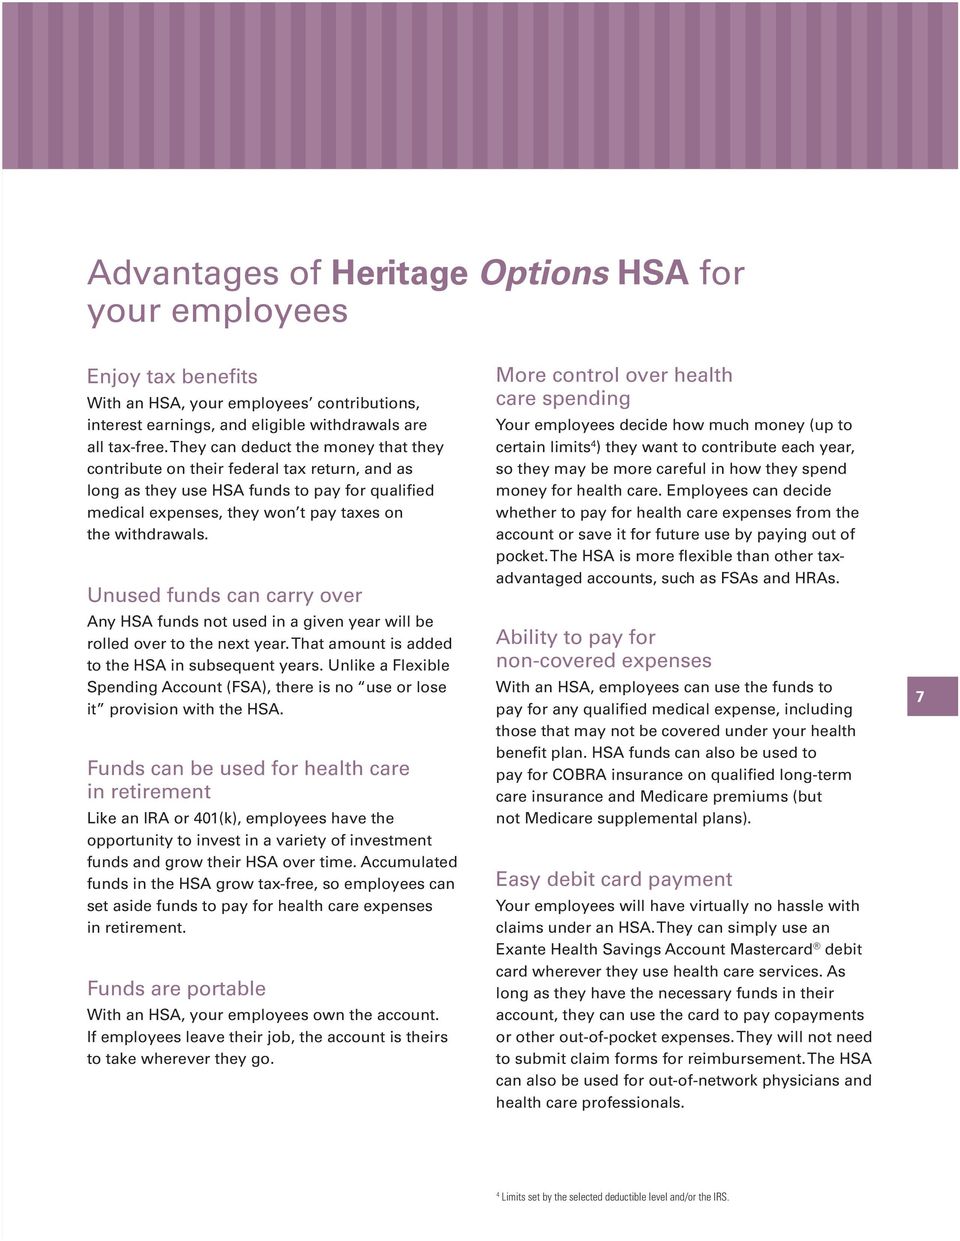 Unused funds can carry over Any HSA funds not used in a given year will be rolled over to the next year. That amount is added to the HSA in subsequent years.